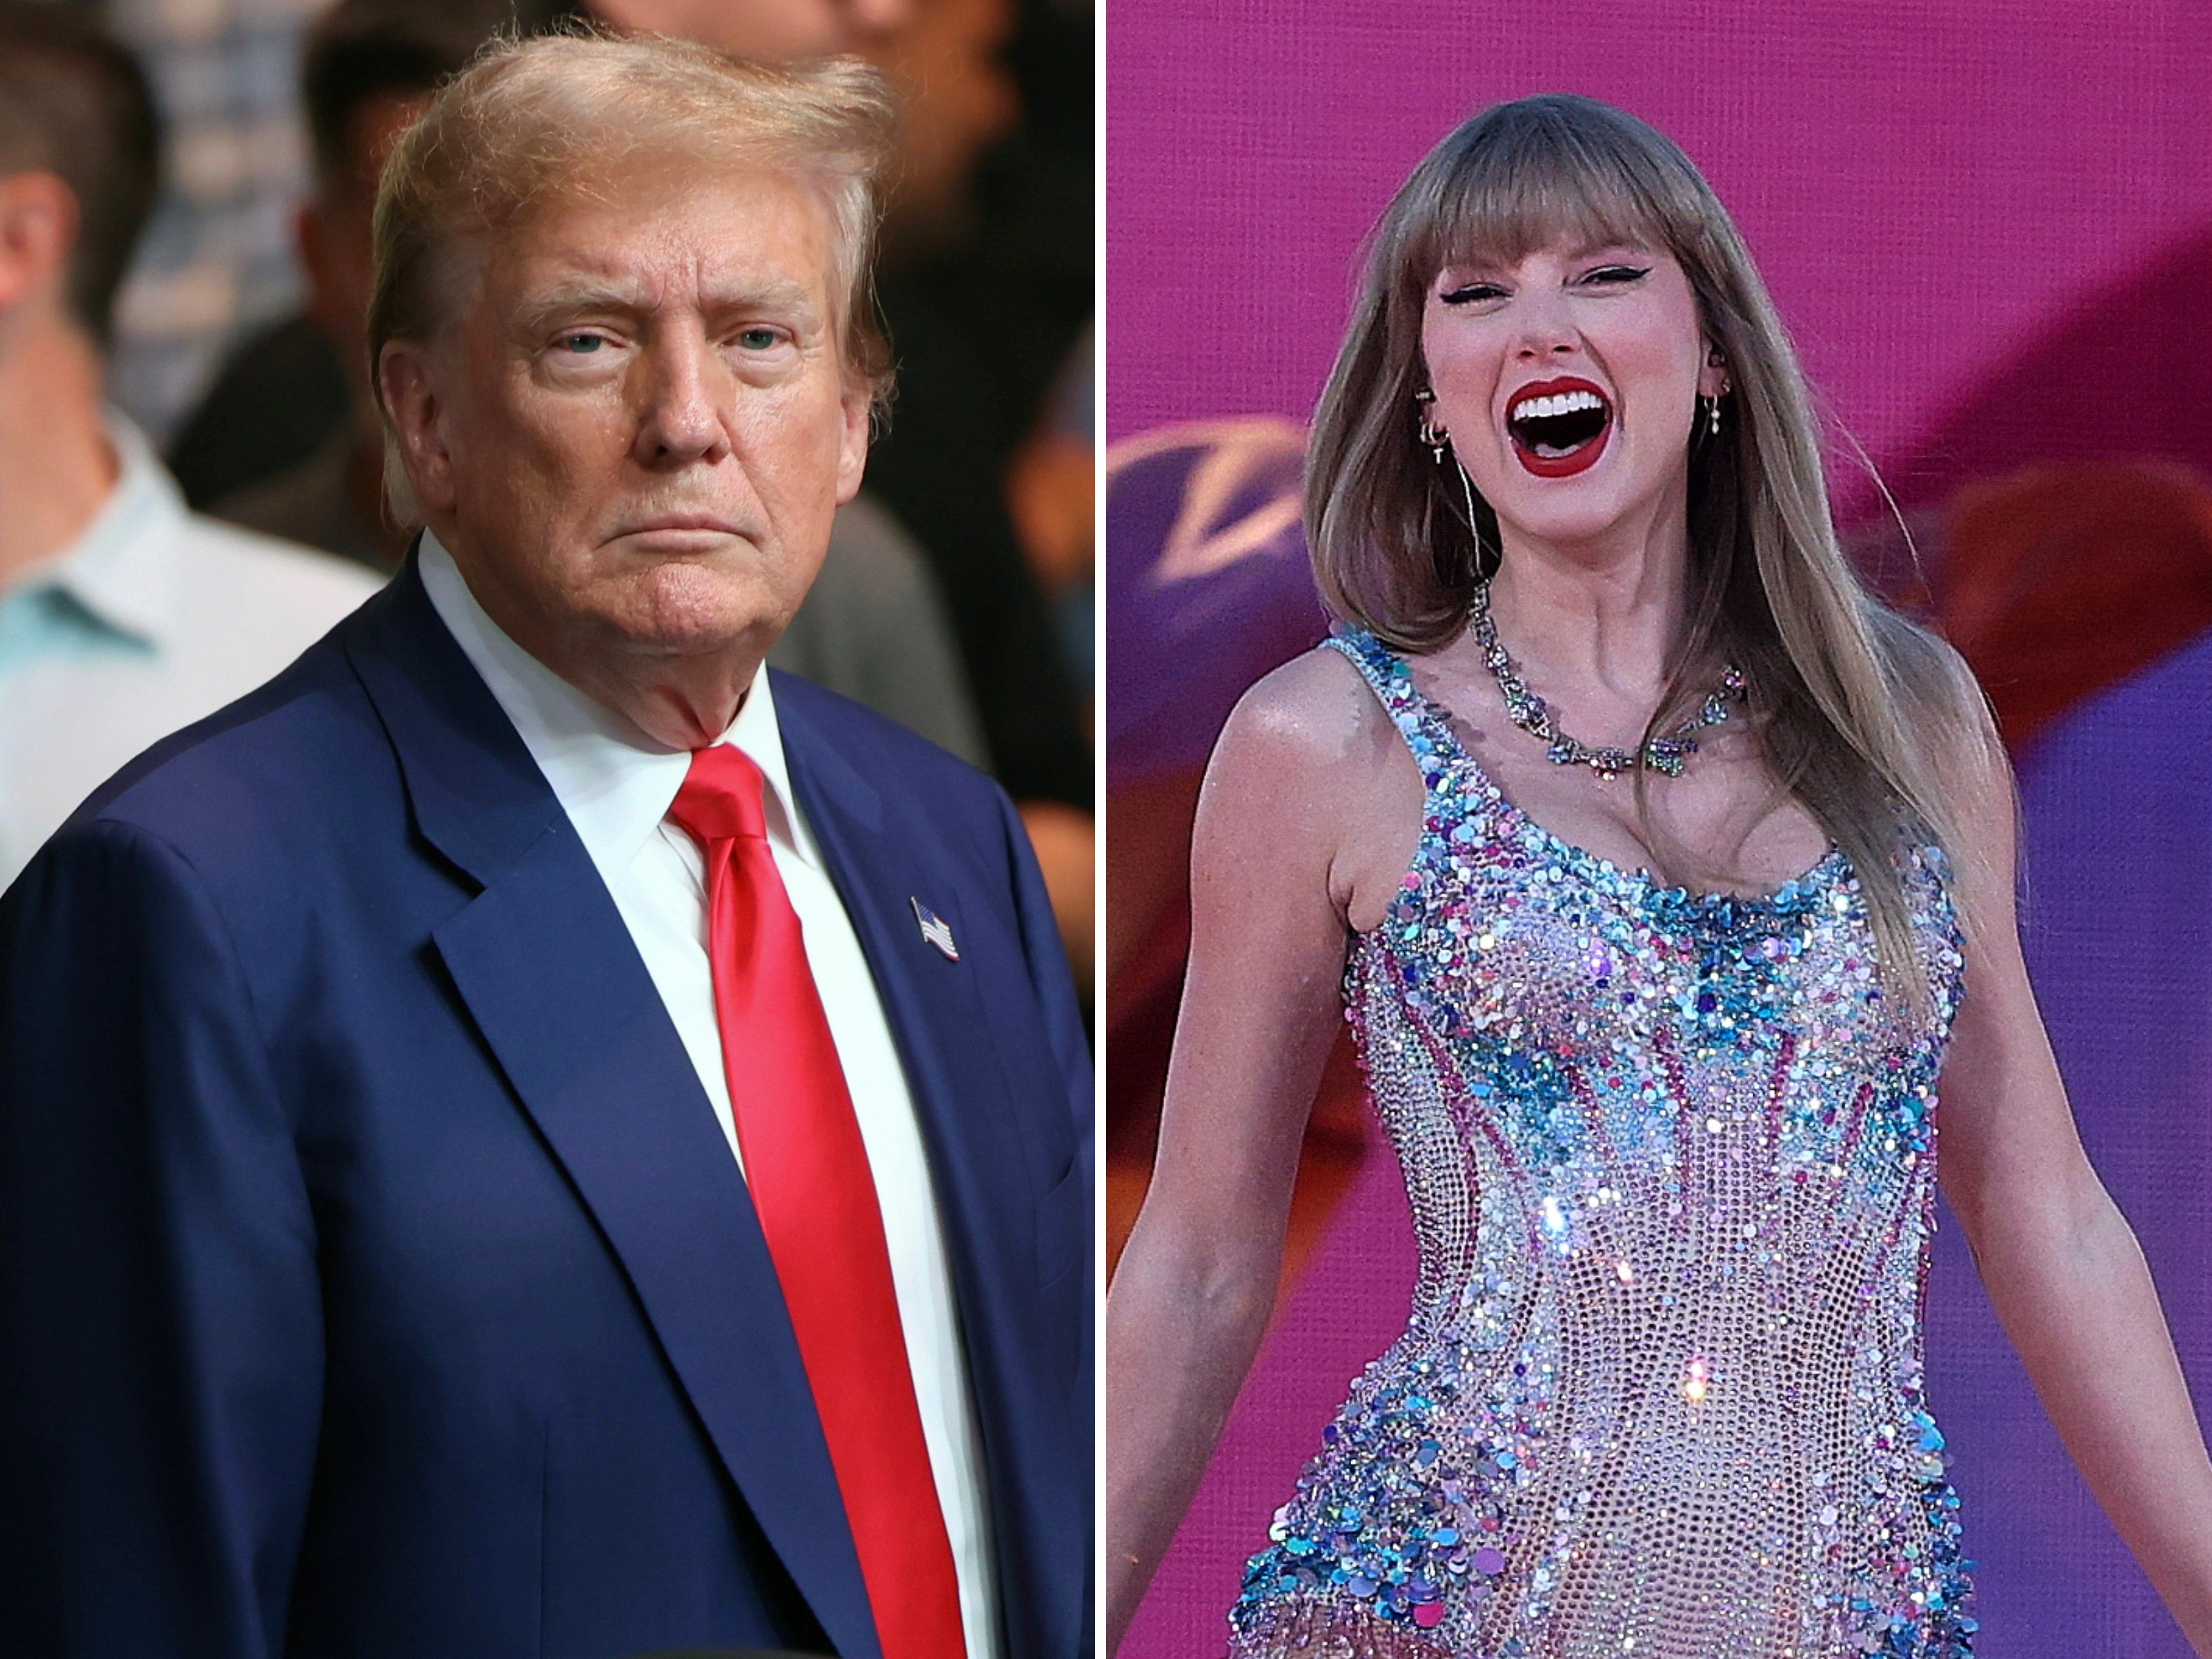 What has presidential hopeful and convicted felon Donald Trump said about Taylor Swift? Photo: TNS/ EPA